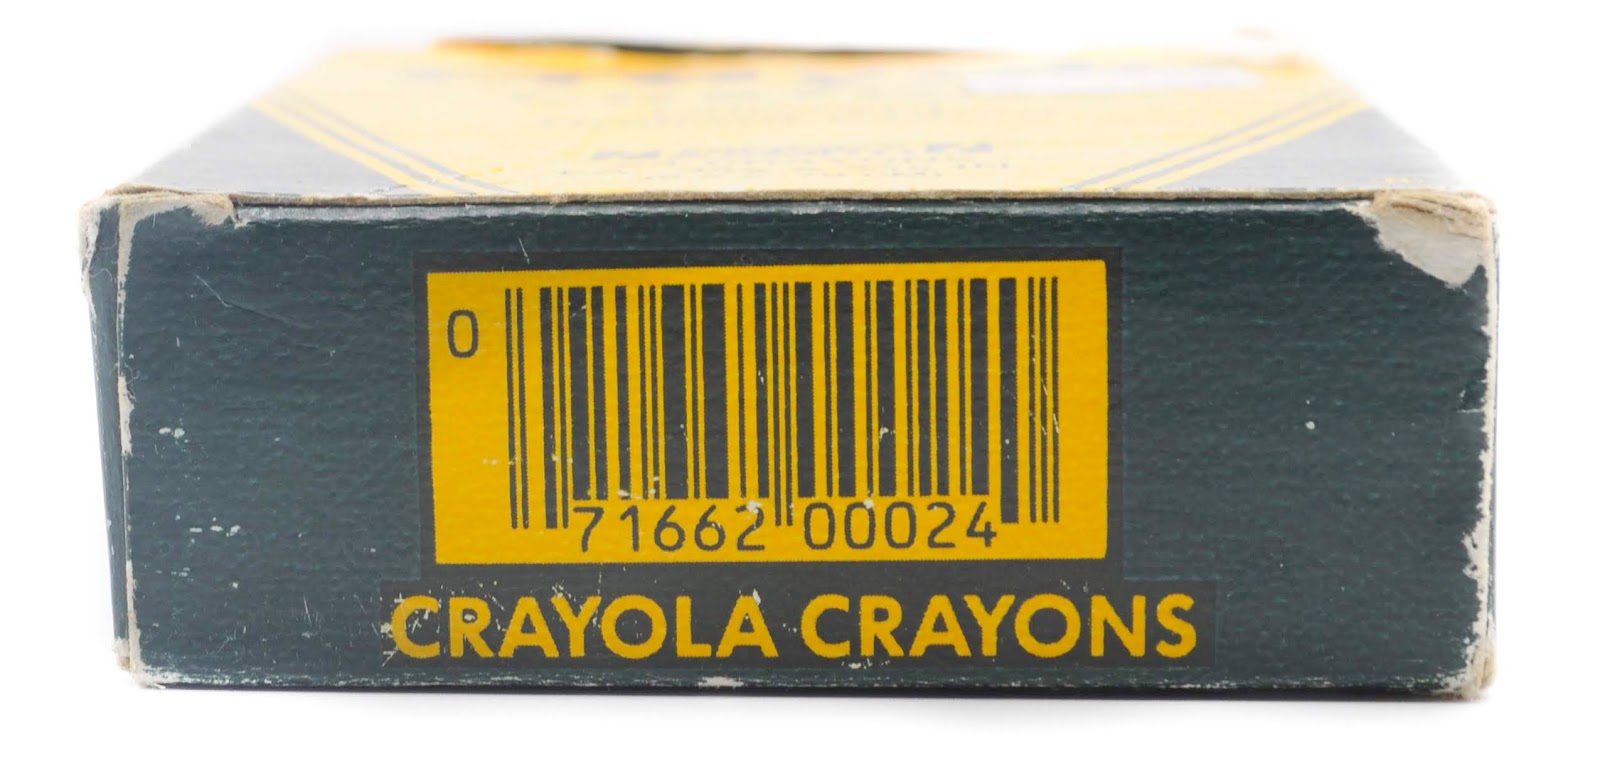 Vintage 24 Crayola Crayons: What's Inside the Box